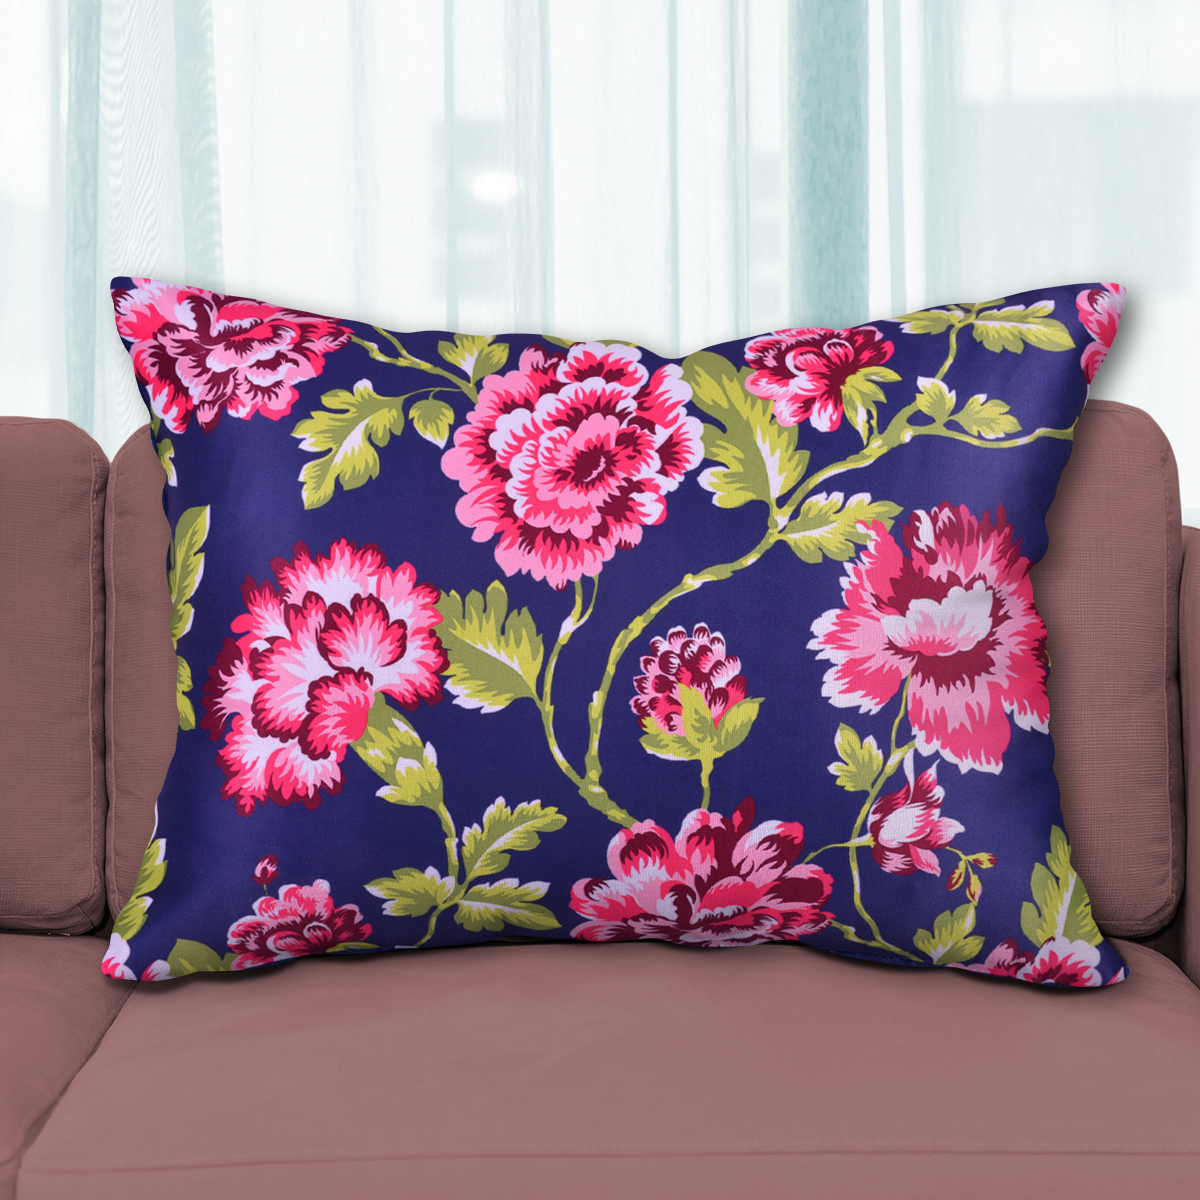 Throw Pillow Covers Set of 4 for Living Room Table, Floral Printed Cushion Case, 14x20 inches - Dark Blue - Home Decor - image 1 of 13